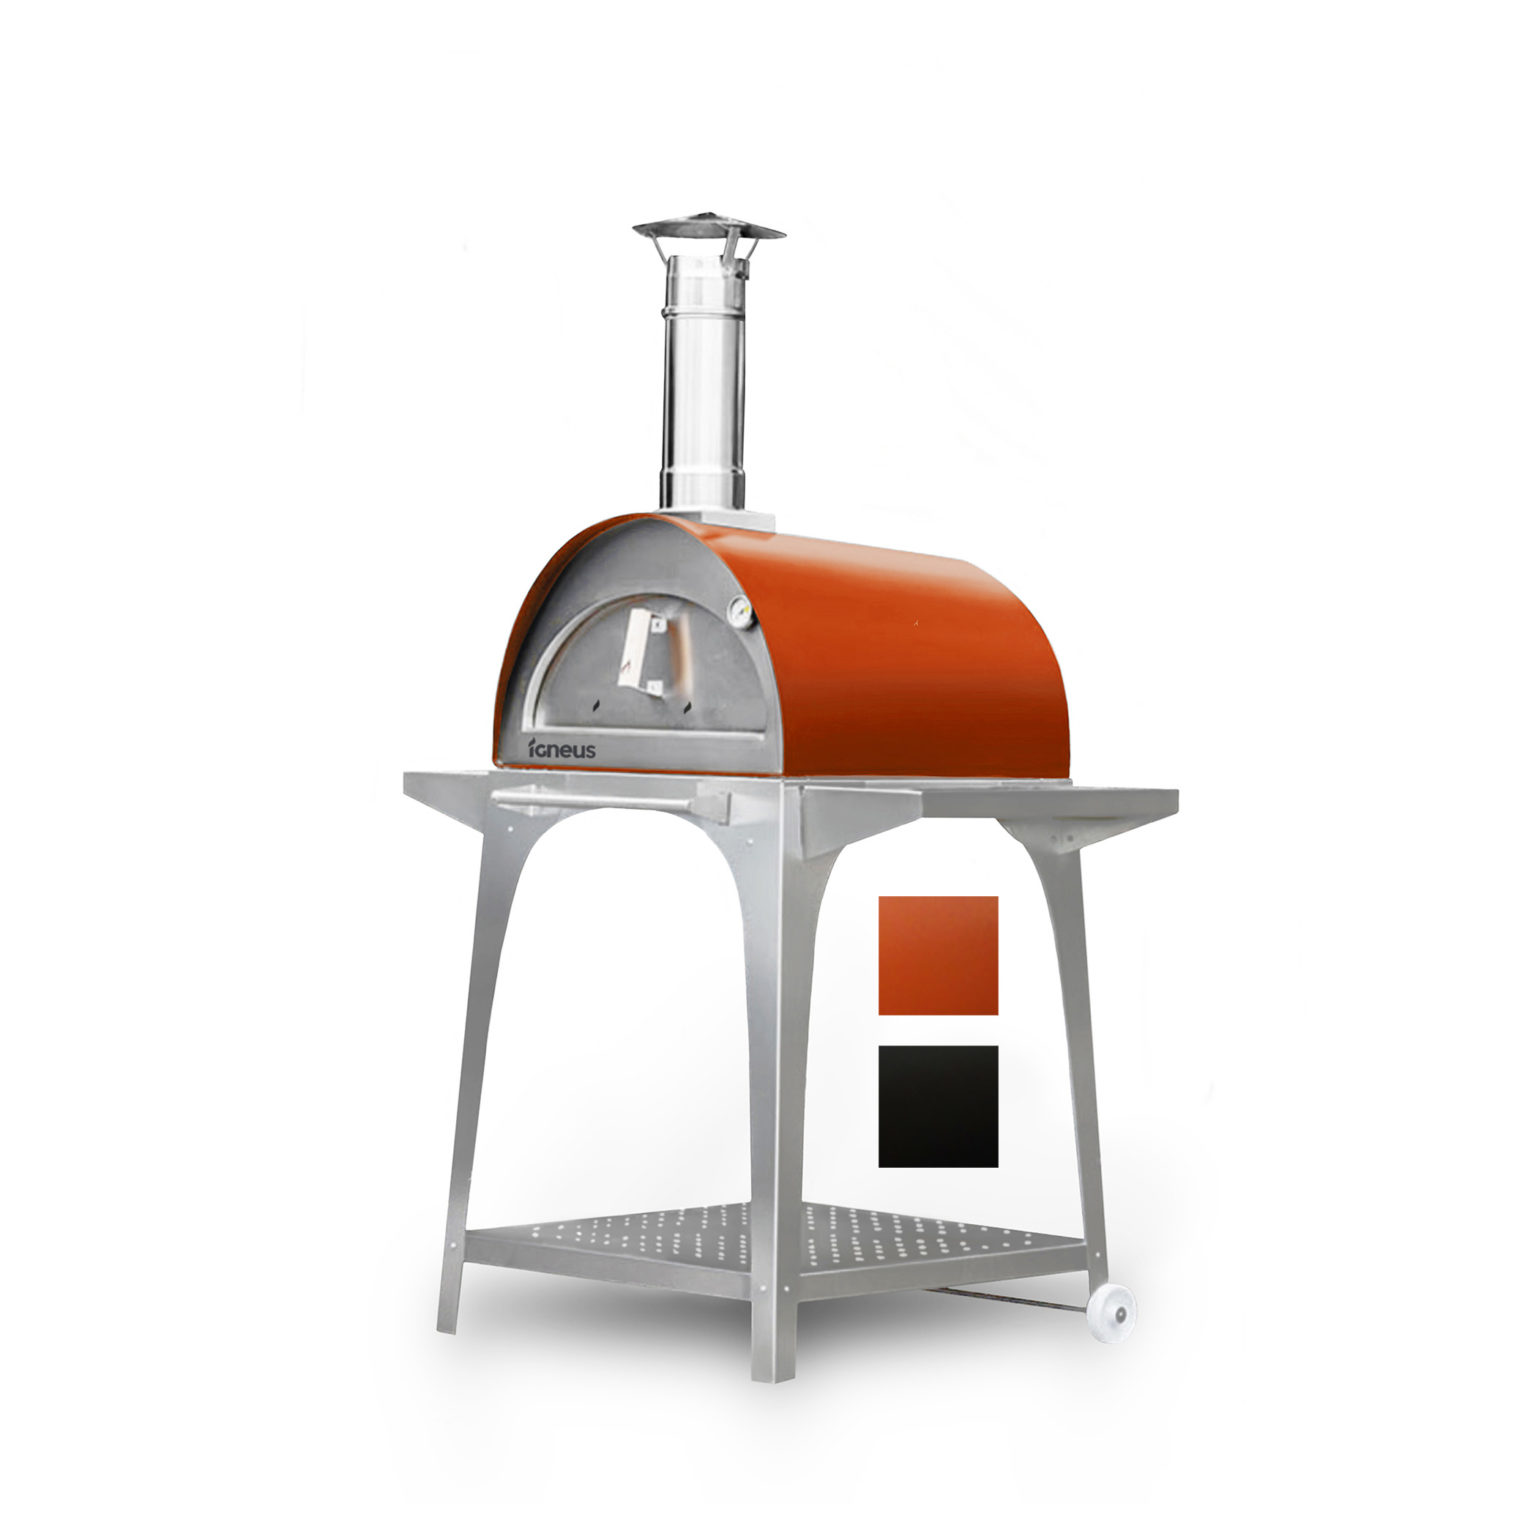 Igneus Bambino wood fired pizza oven with stand